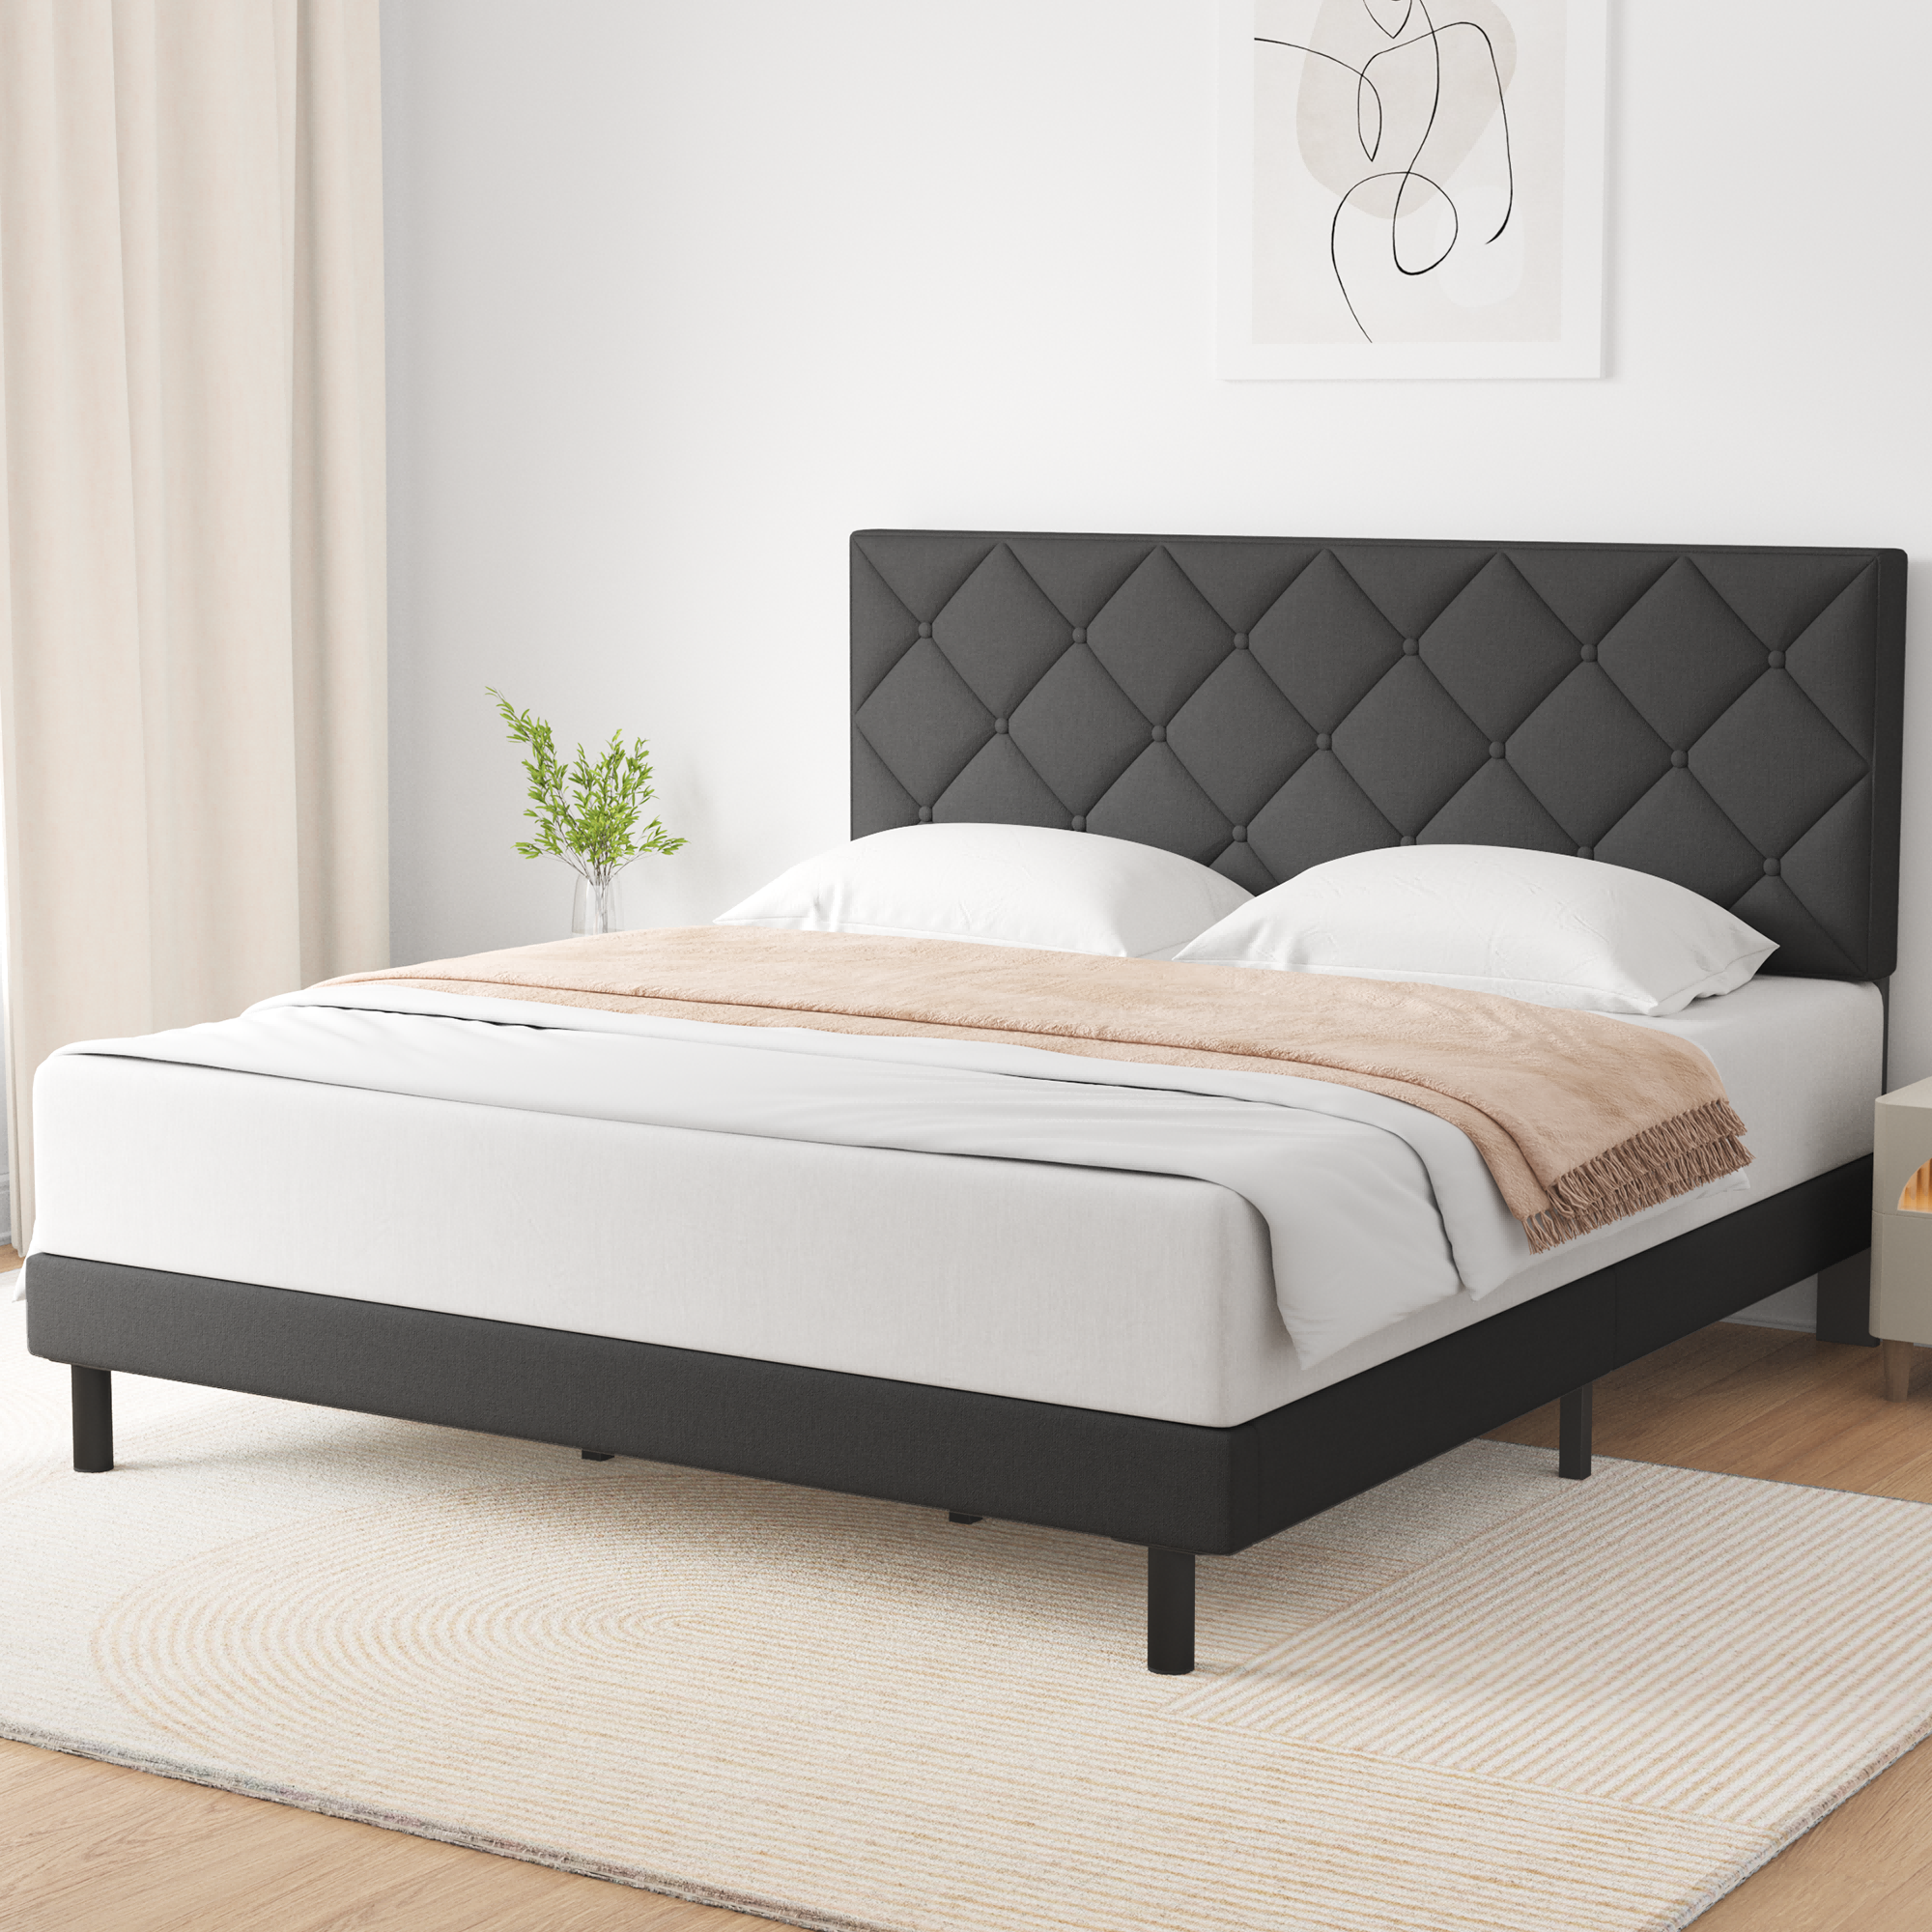 Queen Bed, HAIIDE Queen Size bed Frame with Fabric Upholstered Headboard,Dark Grey, Easy Assembly - image 2 of 7